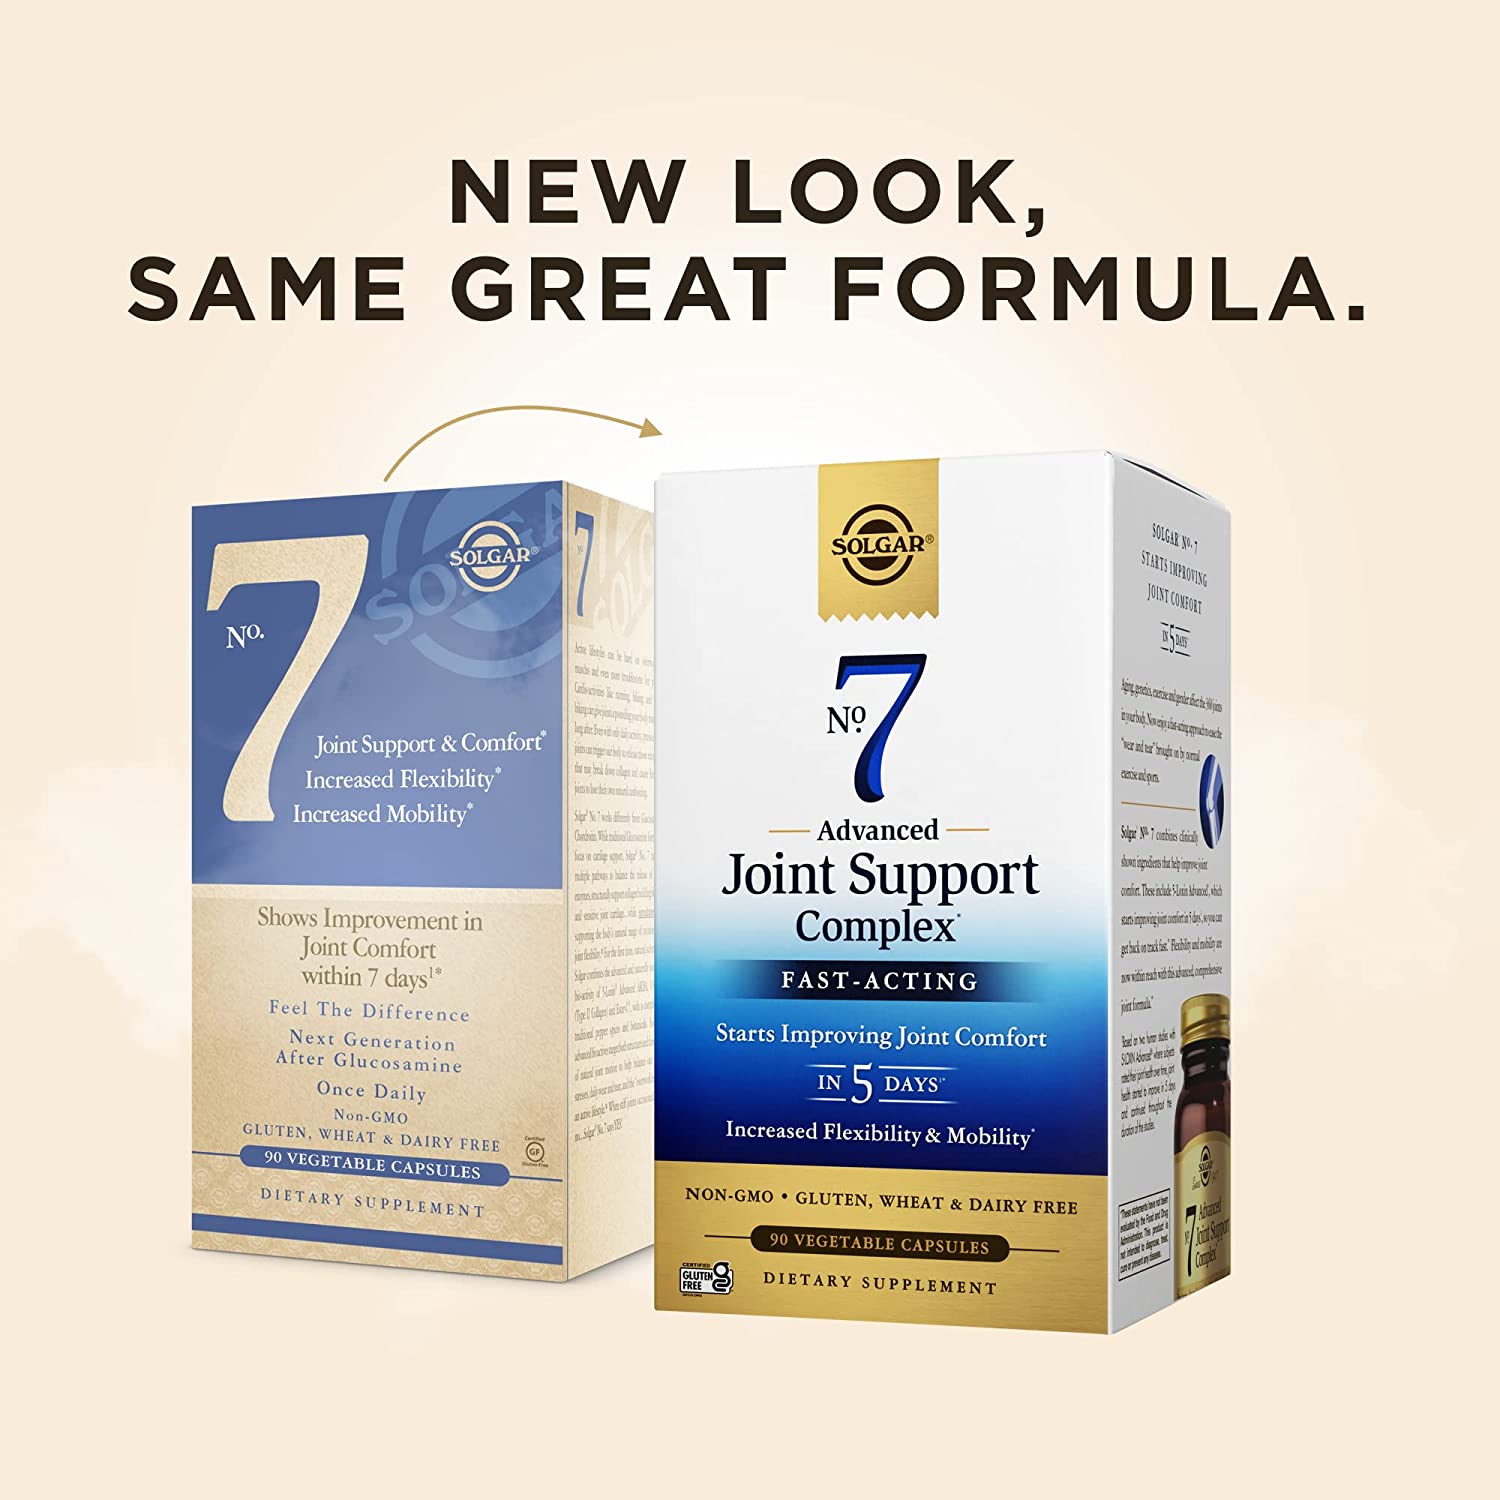 Solgar No.7 Joint Support Complex / 90 Vegetarian Capsules